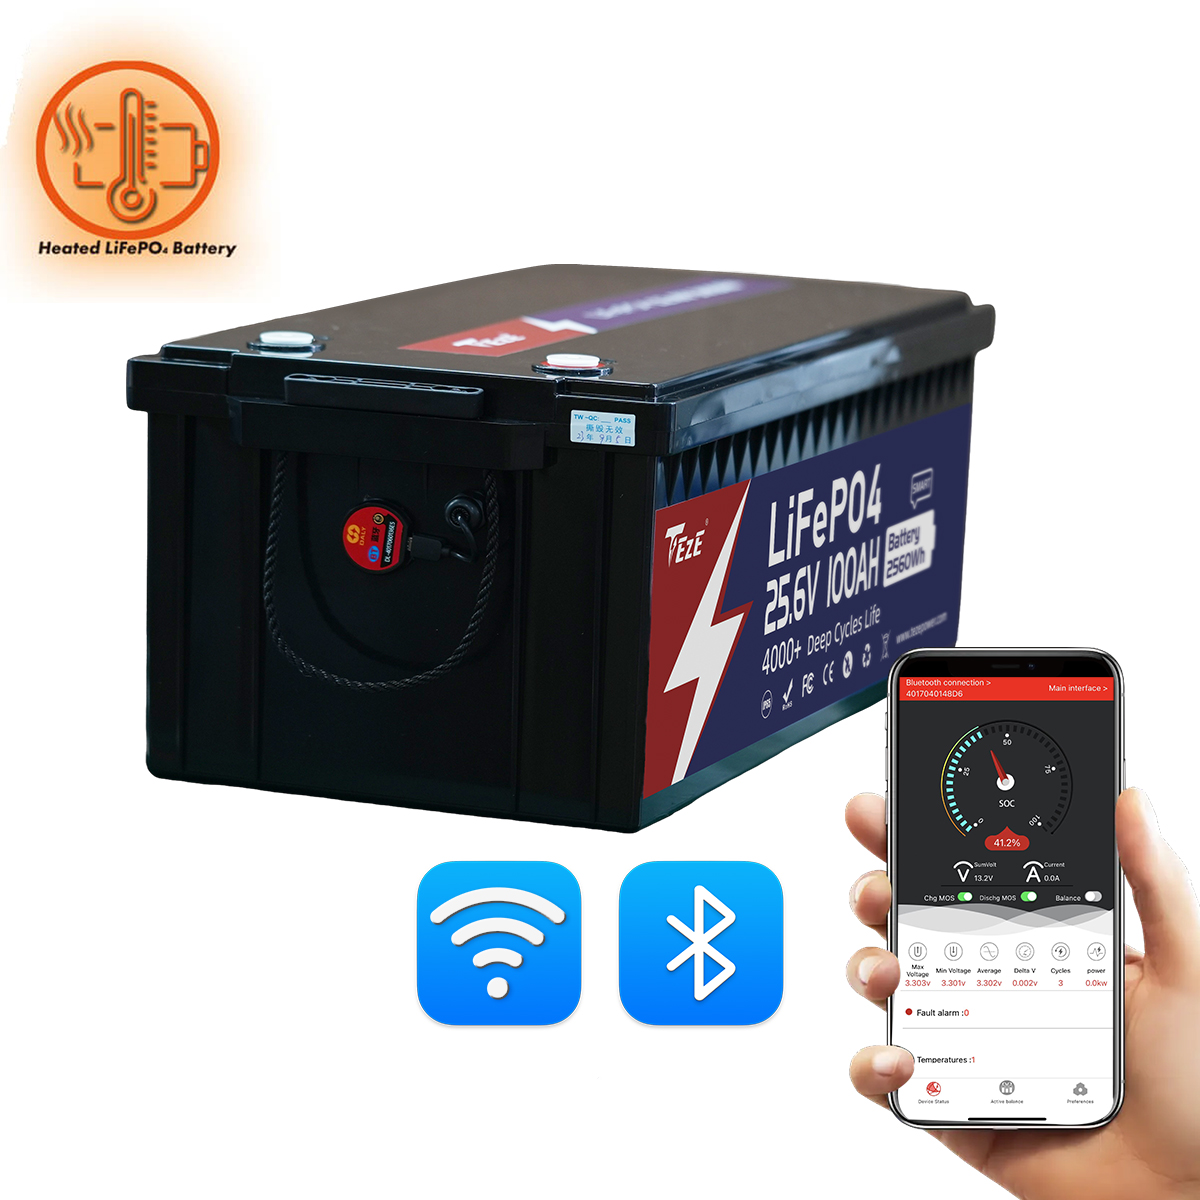 New Add WiFi-TezePower 24V 100Ah LiFePO4 Battery with WiFi and Bluetooth, Self-heating and Active Balancer, Built-in 100A Daly BMS(WiFi External Version)-TezePower